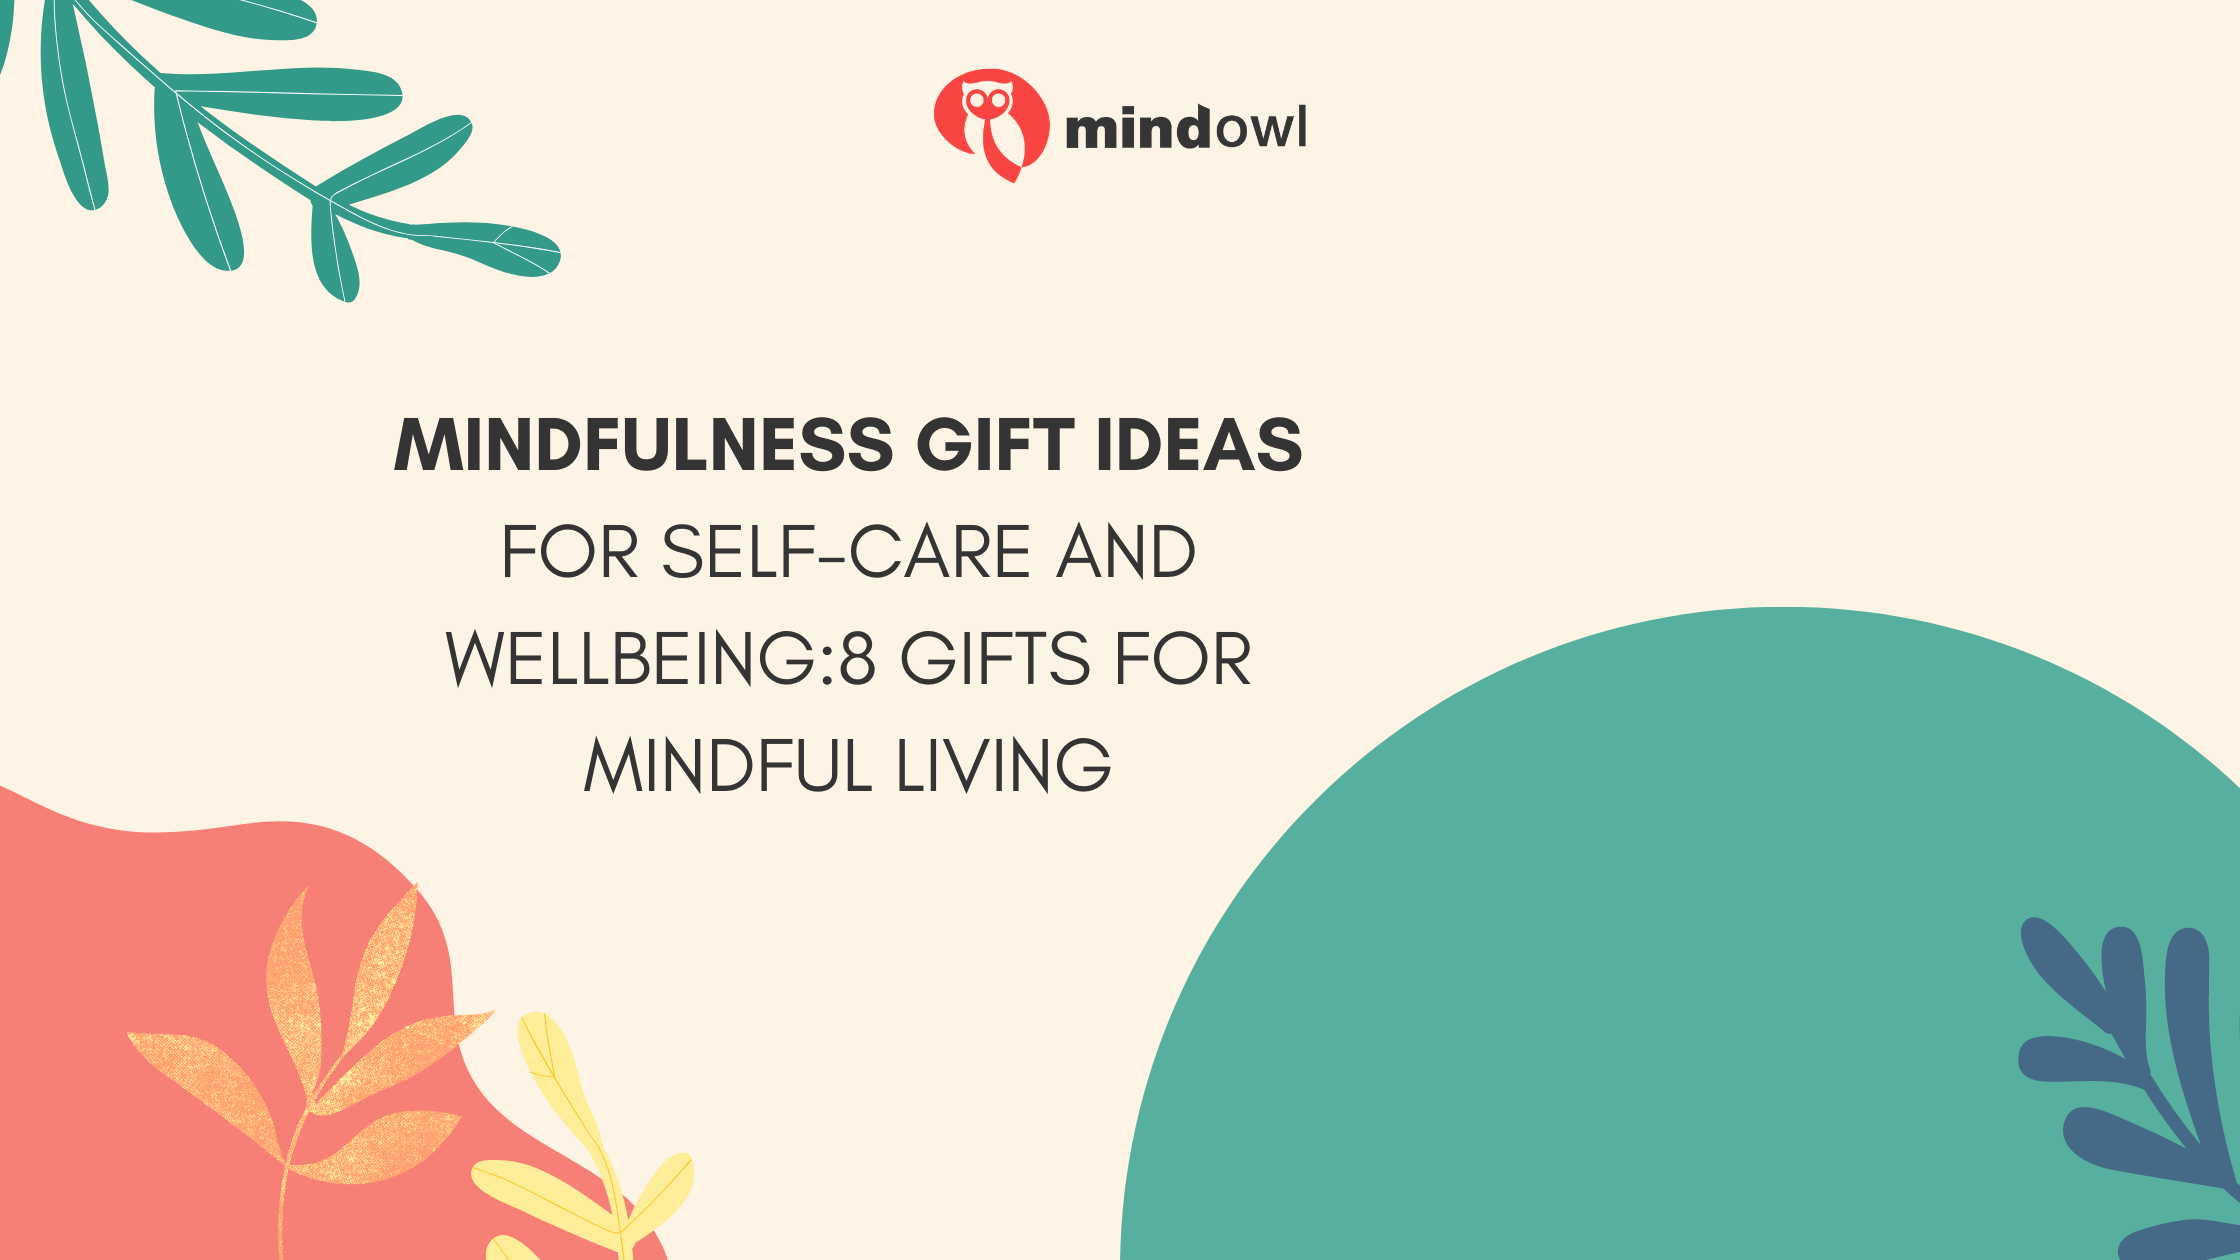 Mindfulness Gift Ideas for Self-Care and Wellbeing: 8 Gifts for Mindful Living